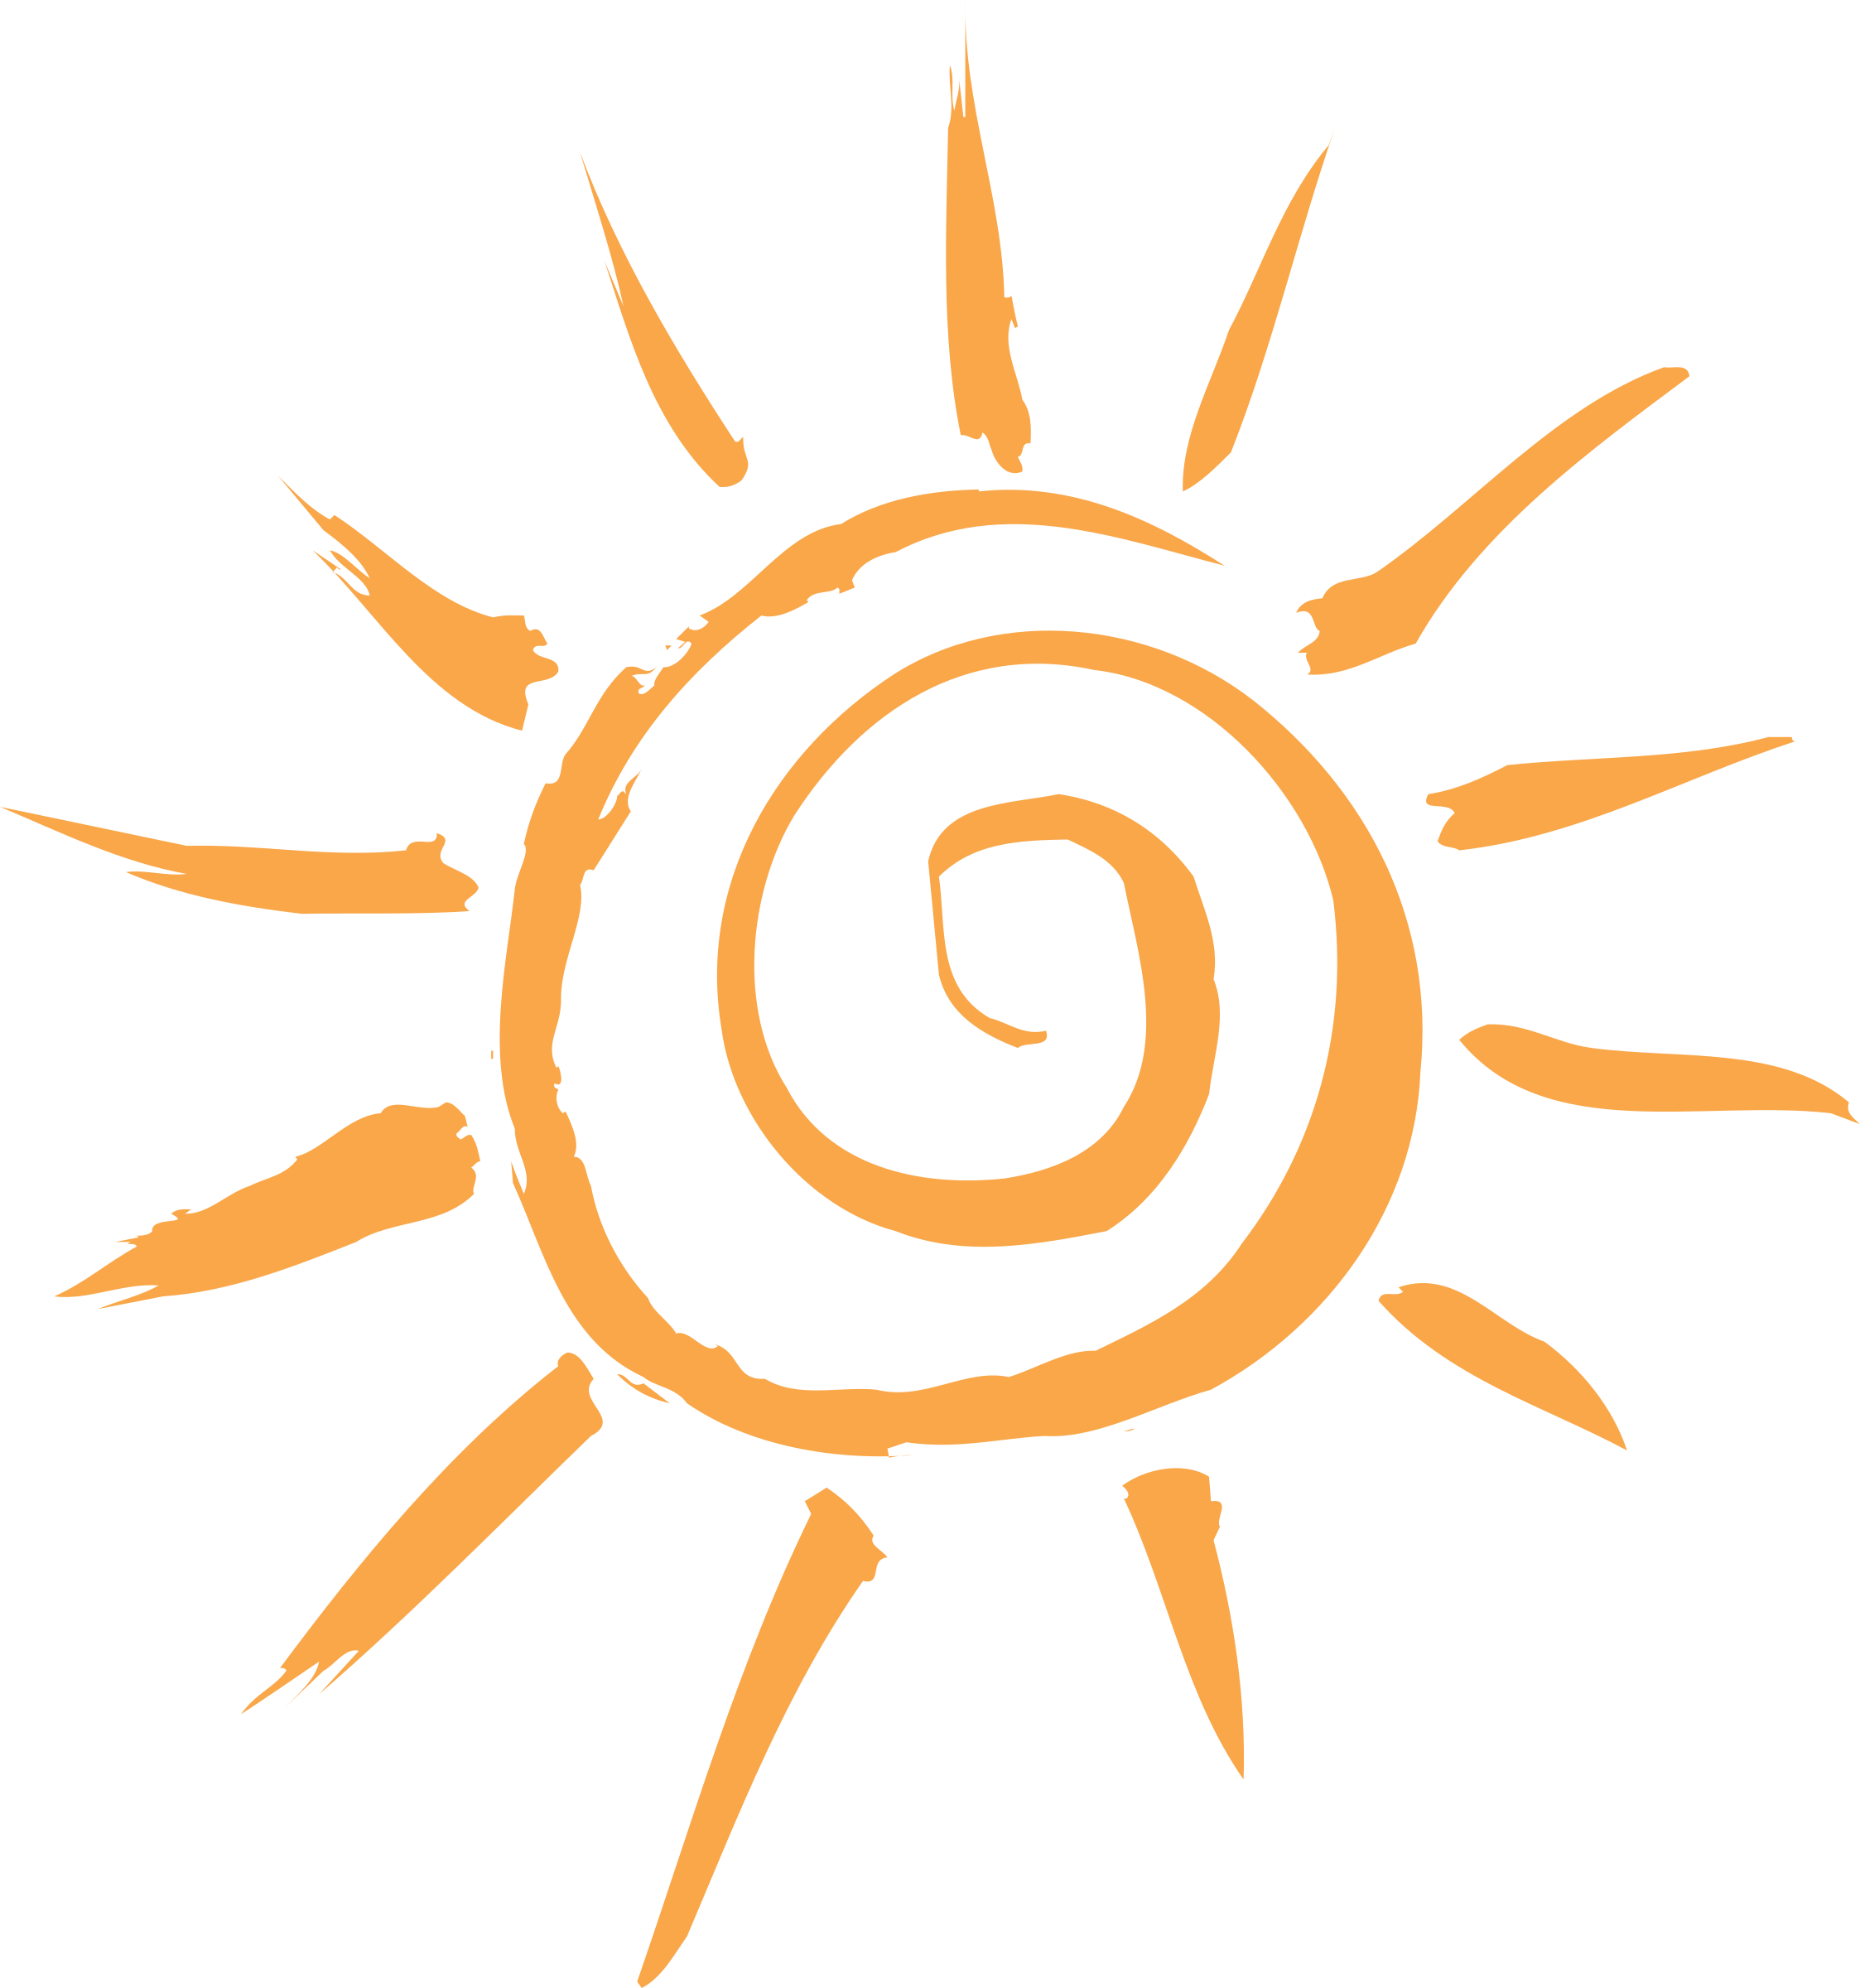 Clipart Sunshine Symbol Clipart Sunshine Symbol Transparent Free For Download On Webstockreview 2021 Inspired by paint tool sai, oekaki shi painter, and harmony. clipart sunshine symbol clipart